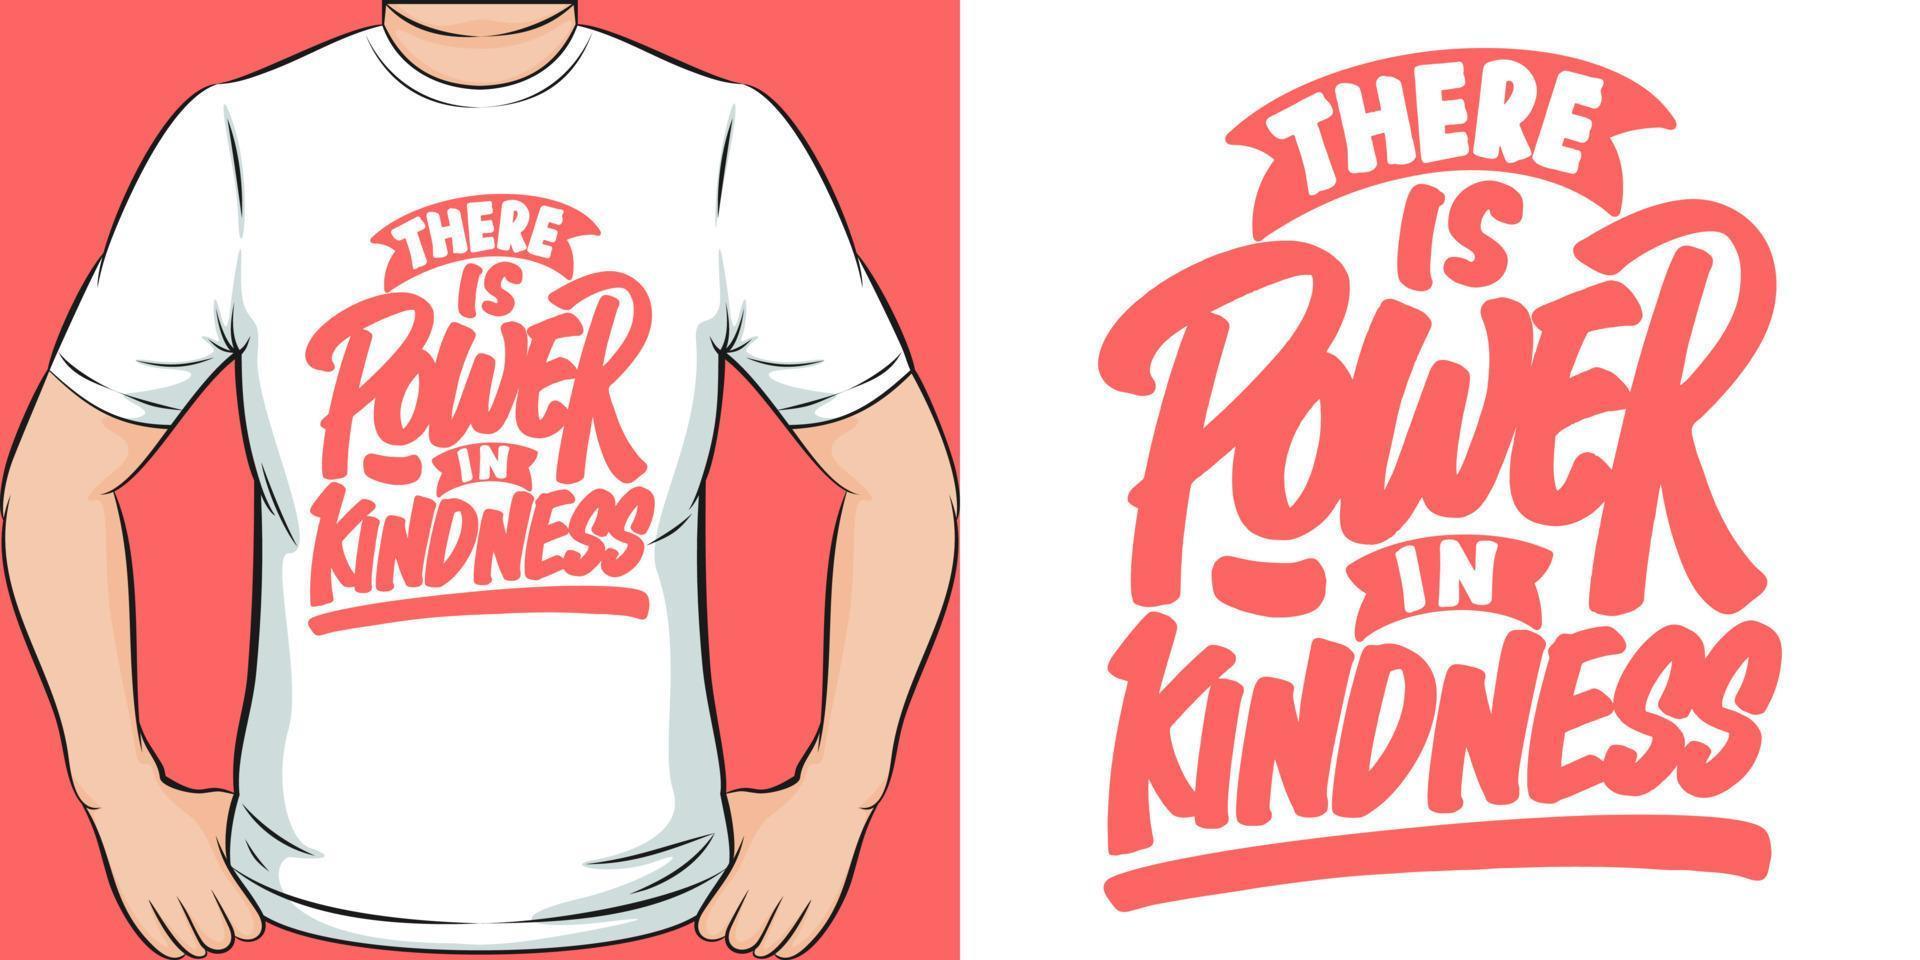 There is Power in Kindness Motivation Typography Quote T-Shirt Design. vector